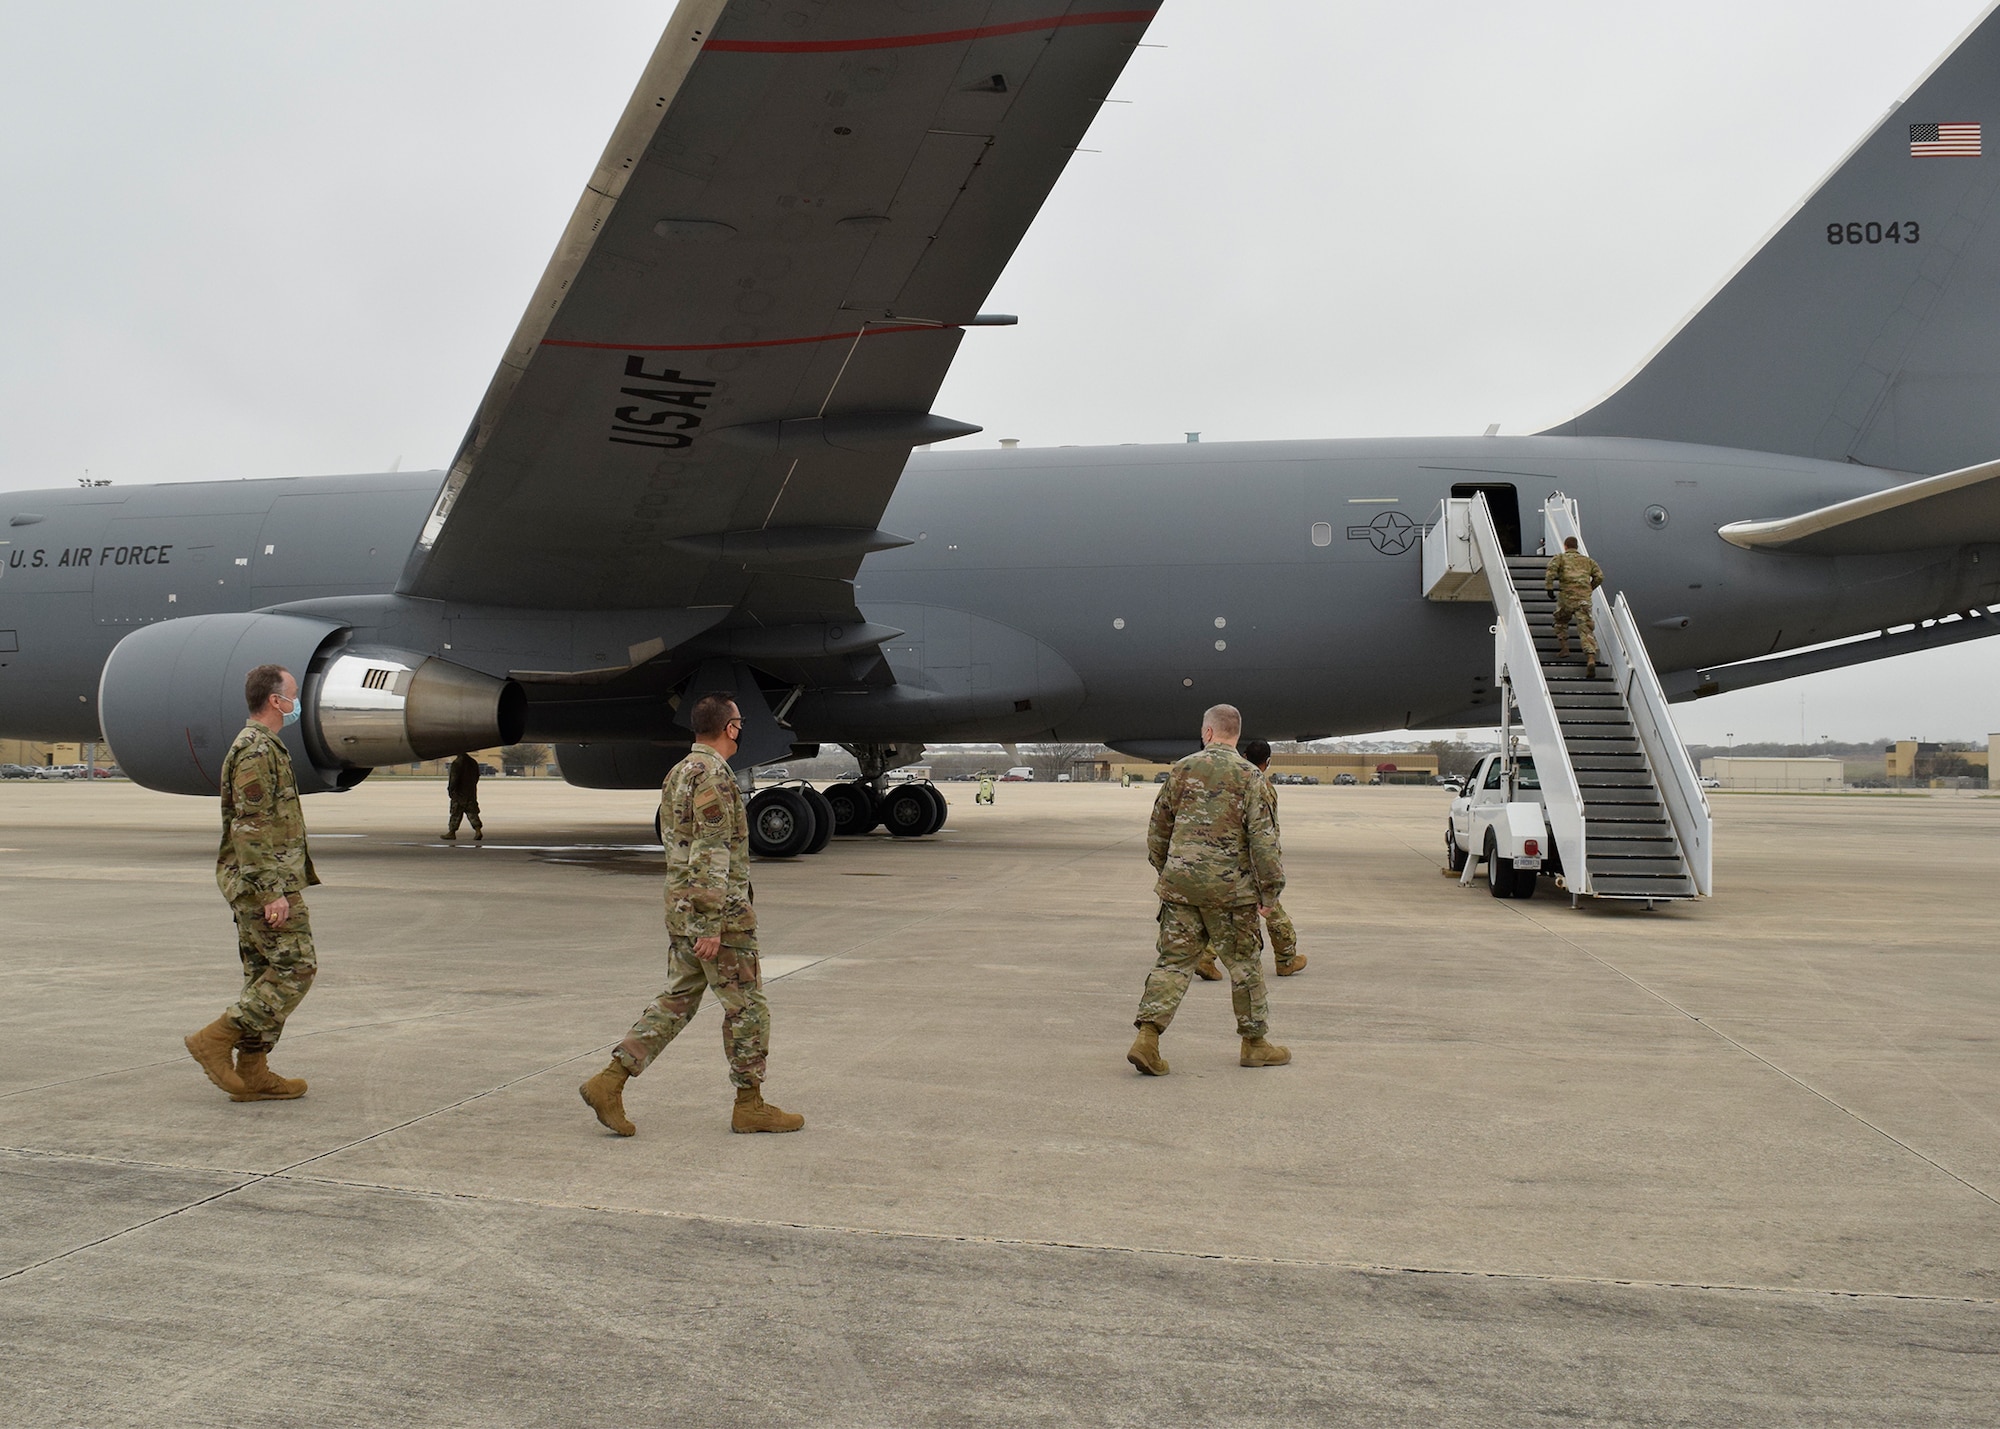 433rd Airlift Wing leaders prepare to board a KC-46A Pegasus to observe 433rd Aeromedical Evacuation Squadron medical personnel conducting initial qualification training March 9, 2021, at Joint Base San Antonio-Lackland, Texas. The KC-46 is a multi-mission capable aircraft, which can refuel other military aircraft in-flight and transport passengers, patients and cargo. (U.S. Air Force photo by Senior Airman Brittany Wich)